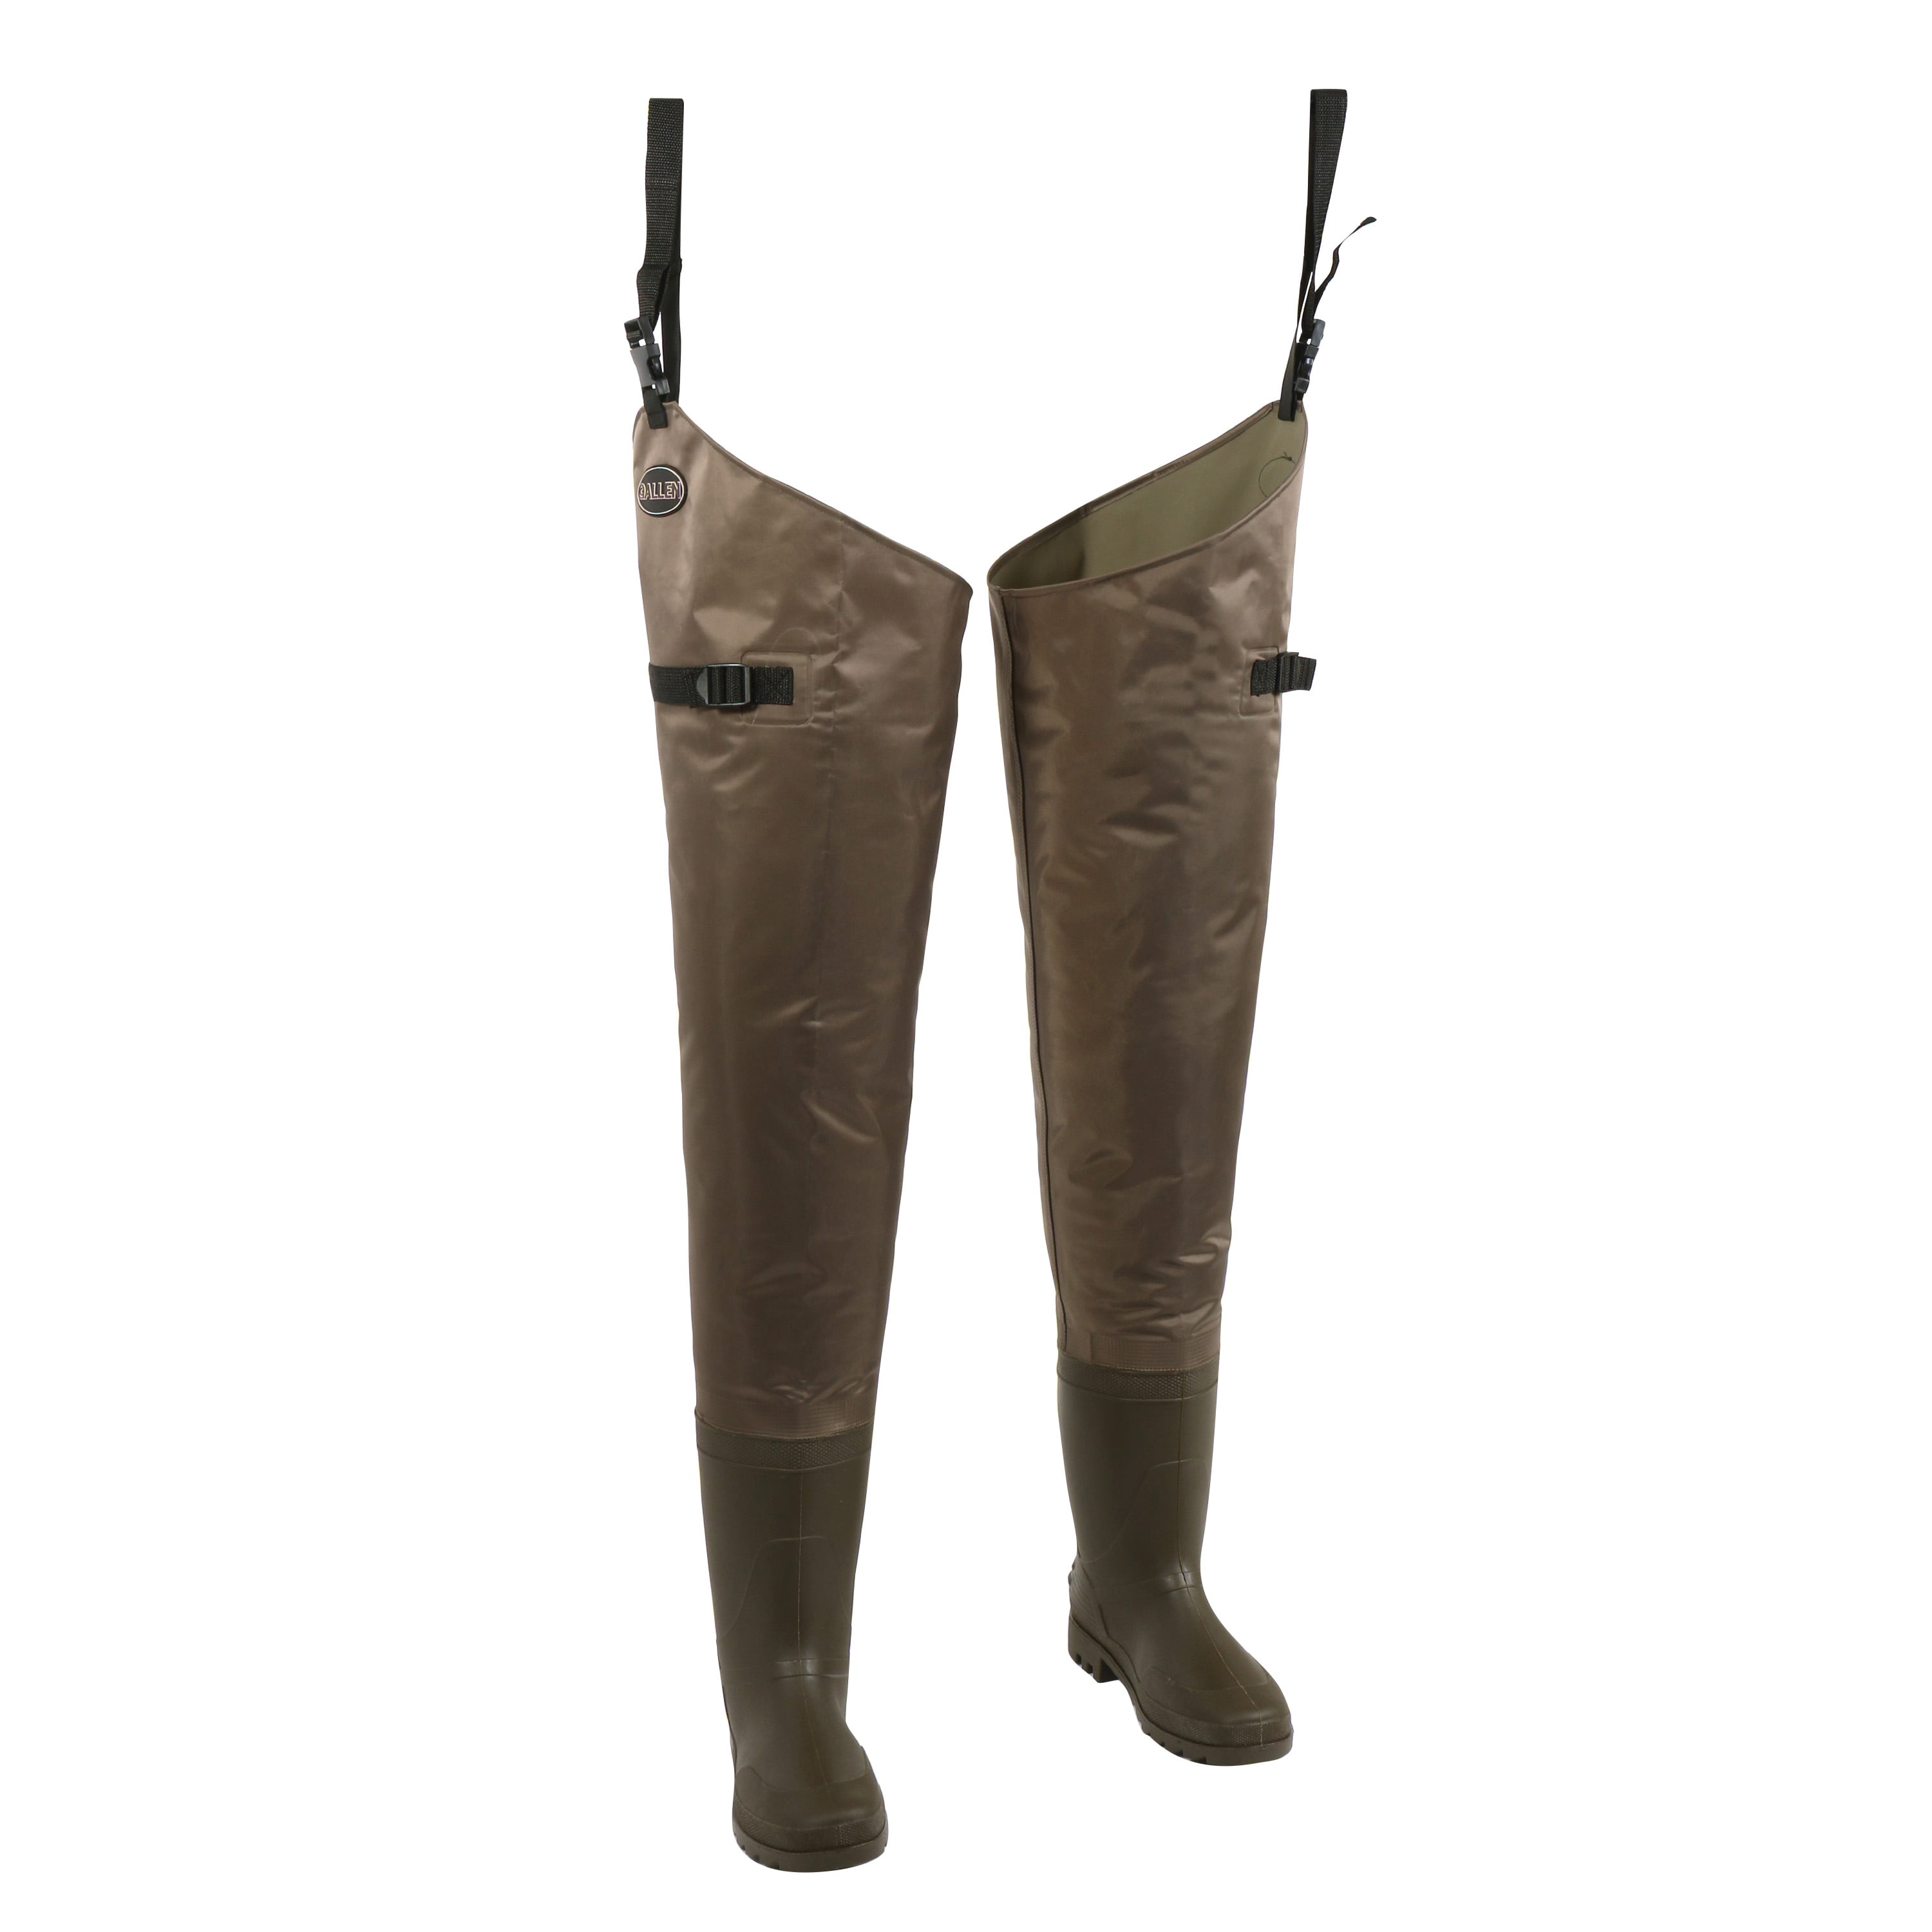 Allen Company Black River Hip Fishing Waders, Size 9, Chocolate Brown